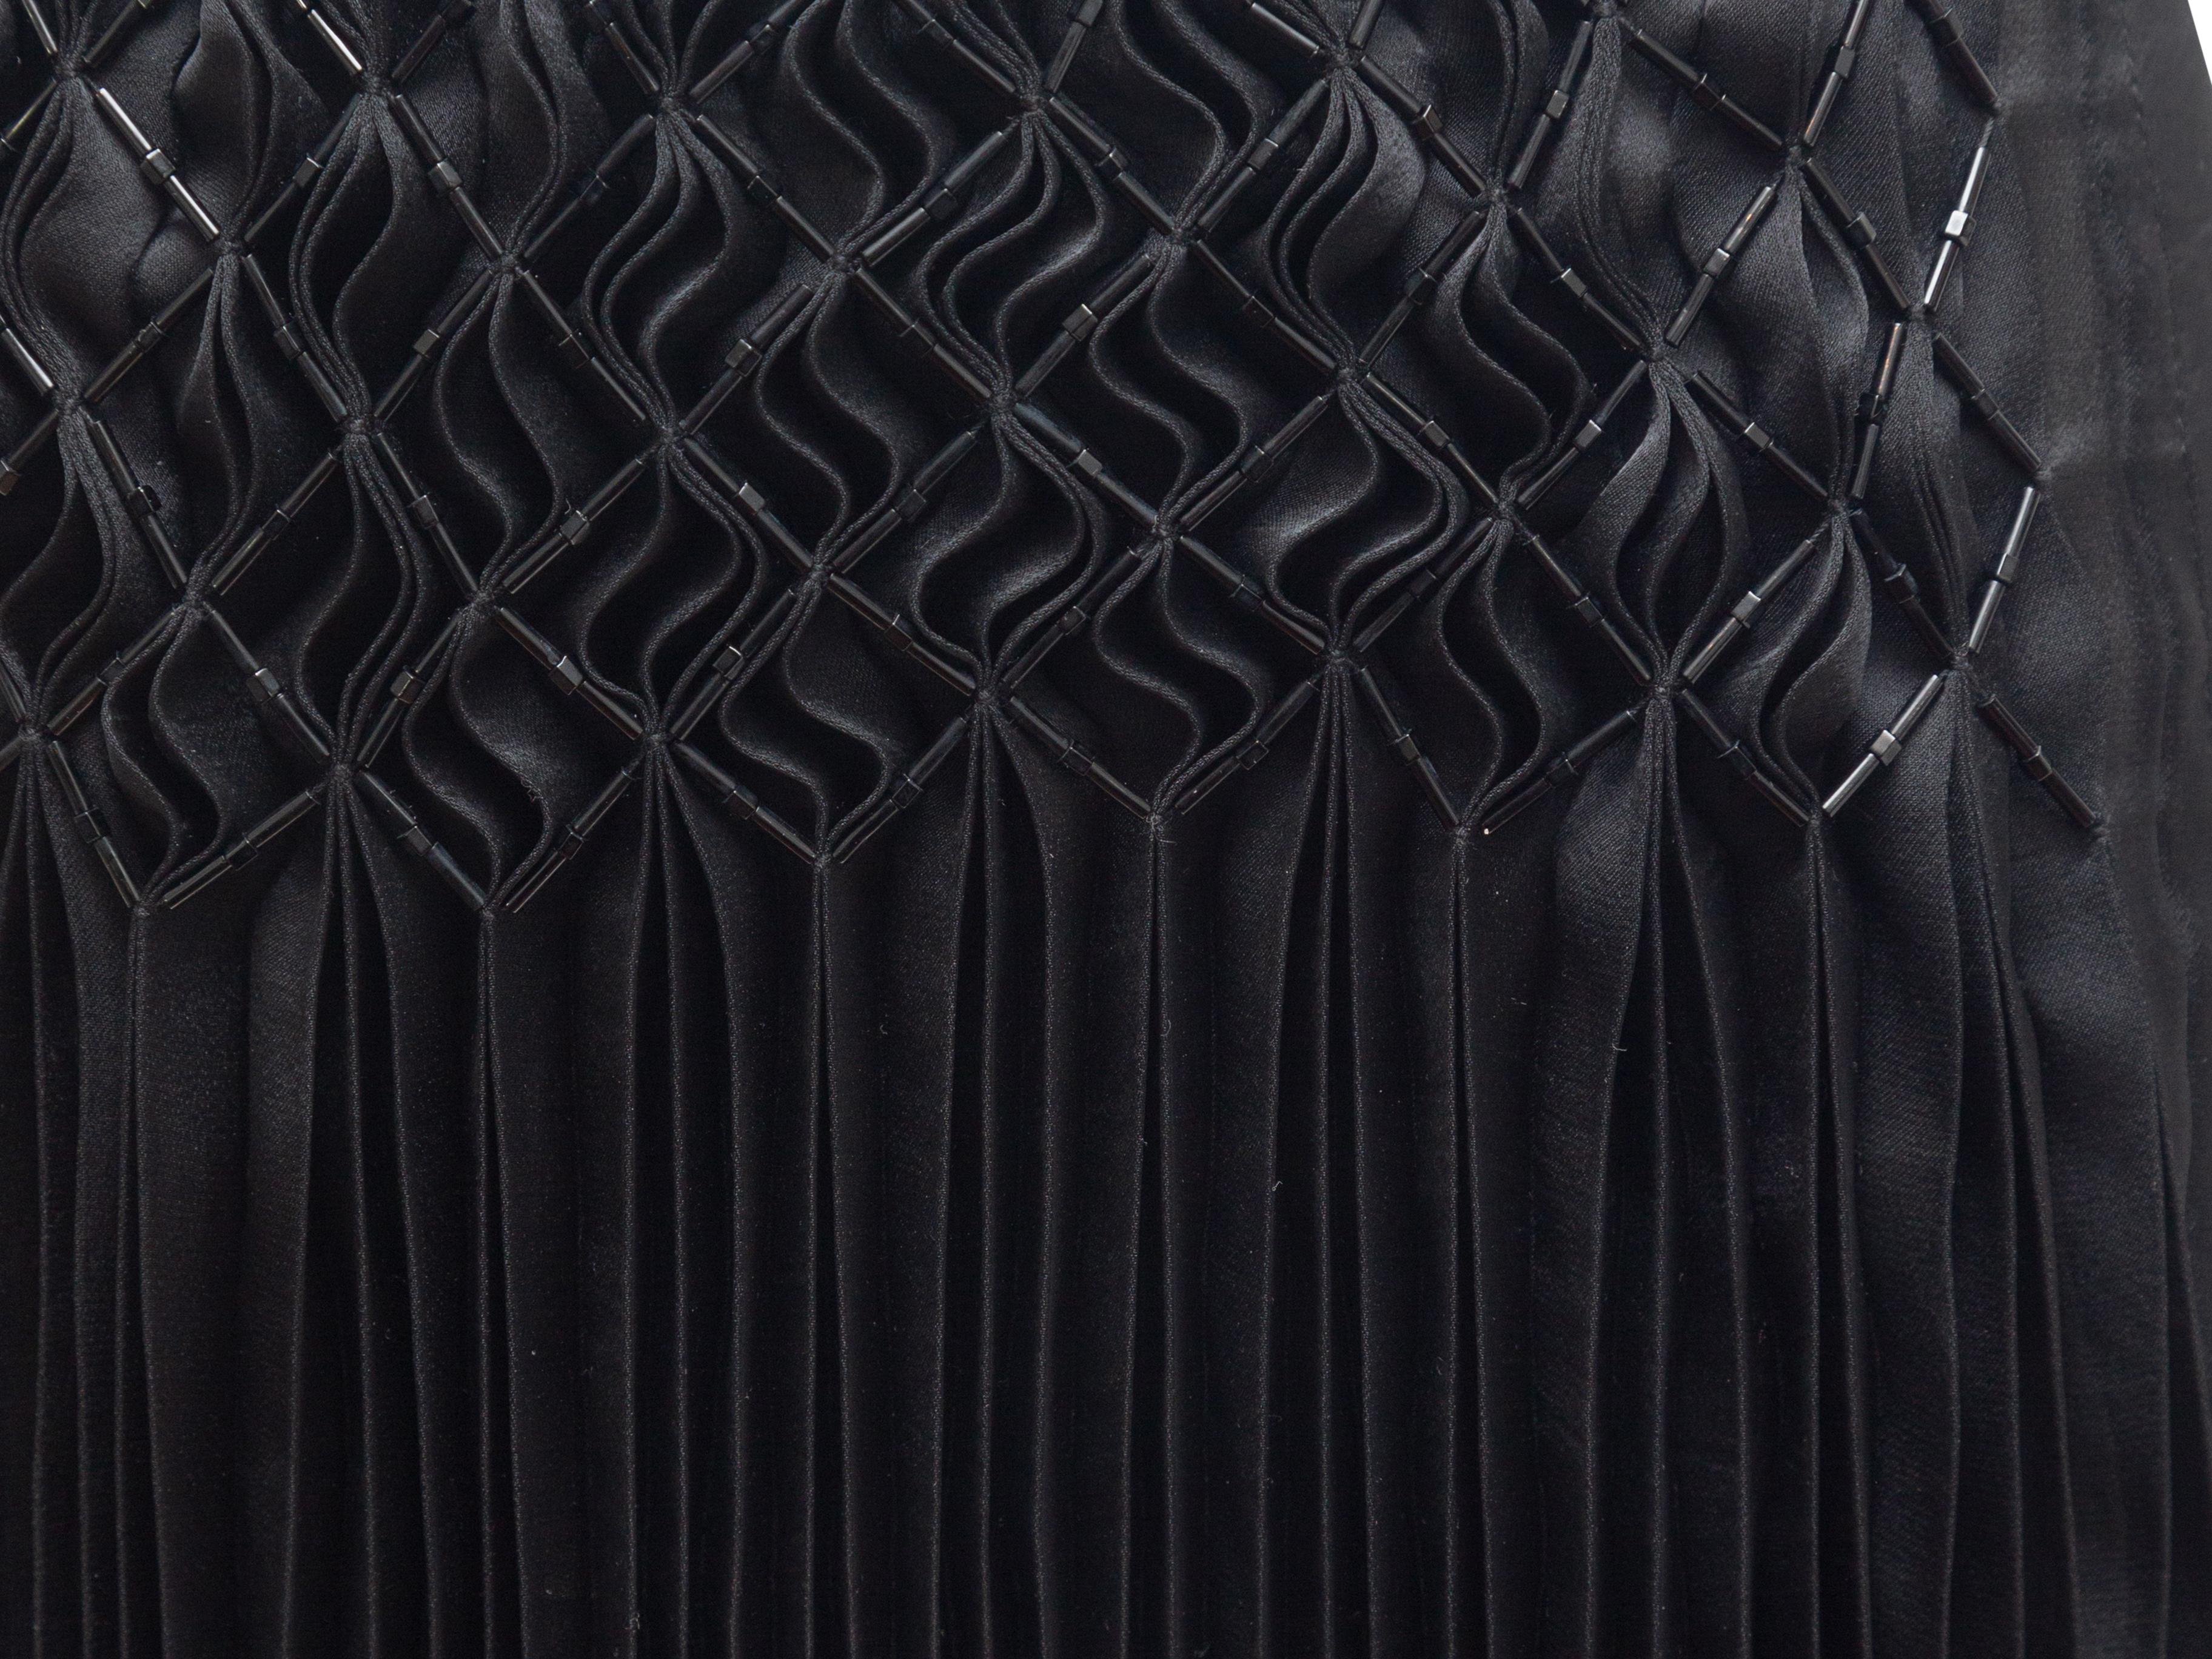 Product details: Black pleated skirt by Issey Miyake Fete. Tonal bead accents at pleats. 31